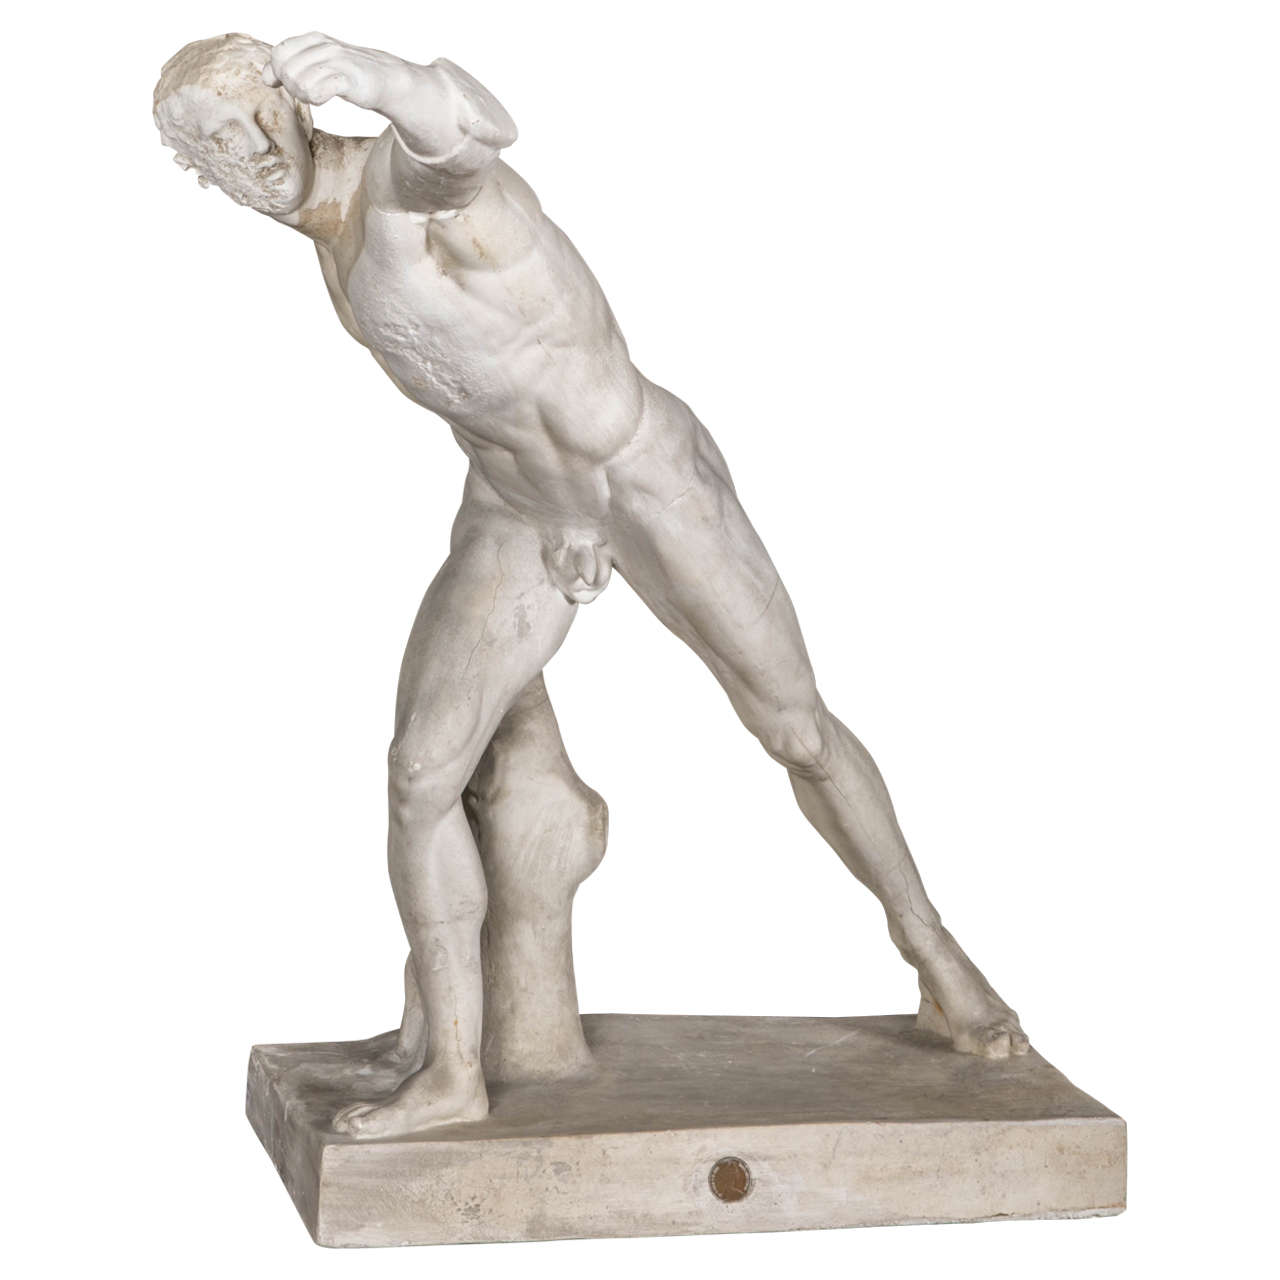 Plaster Reproduction of the Borghese Gladiator, England, circa 1900